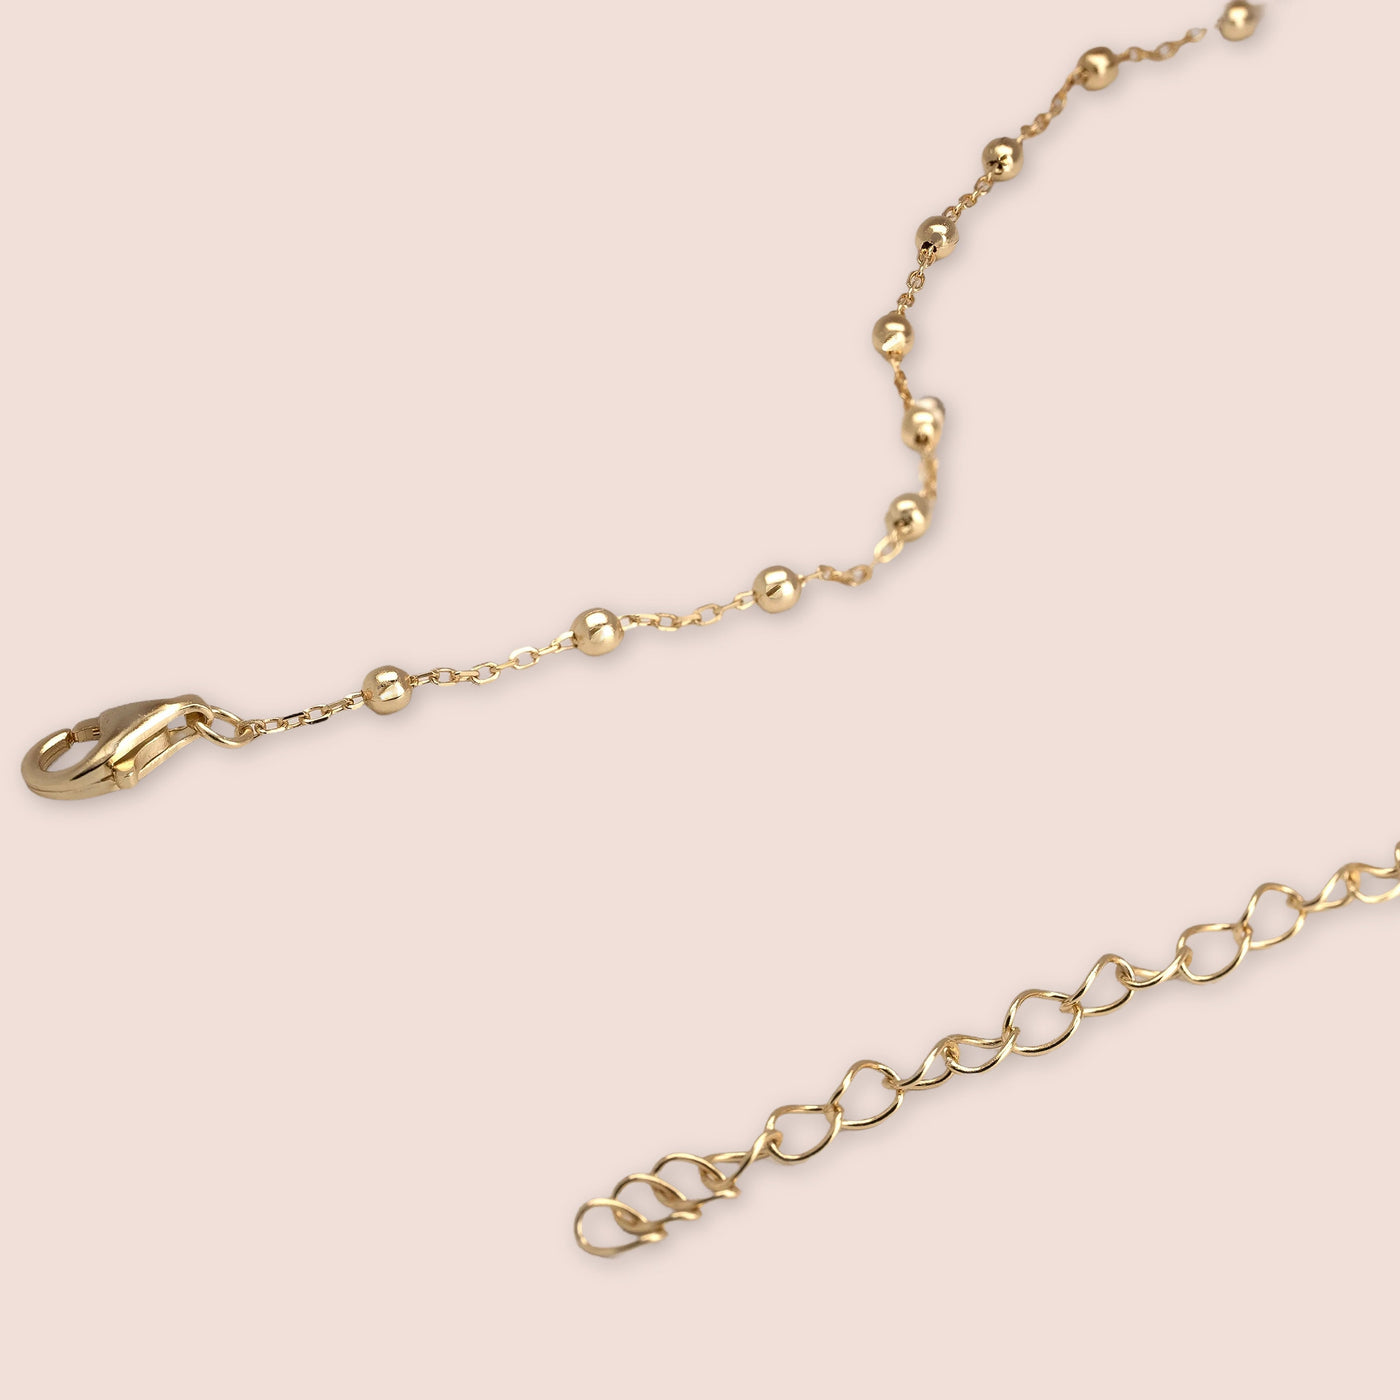 Gold Ball Chain Necklace